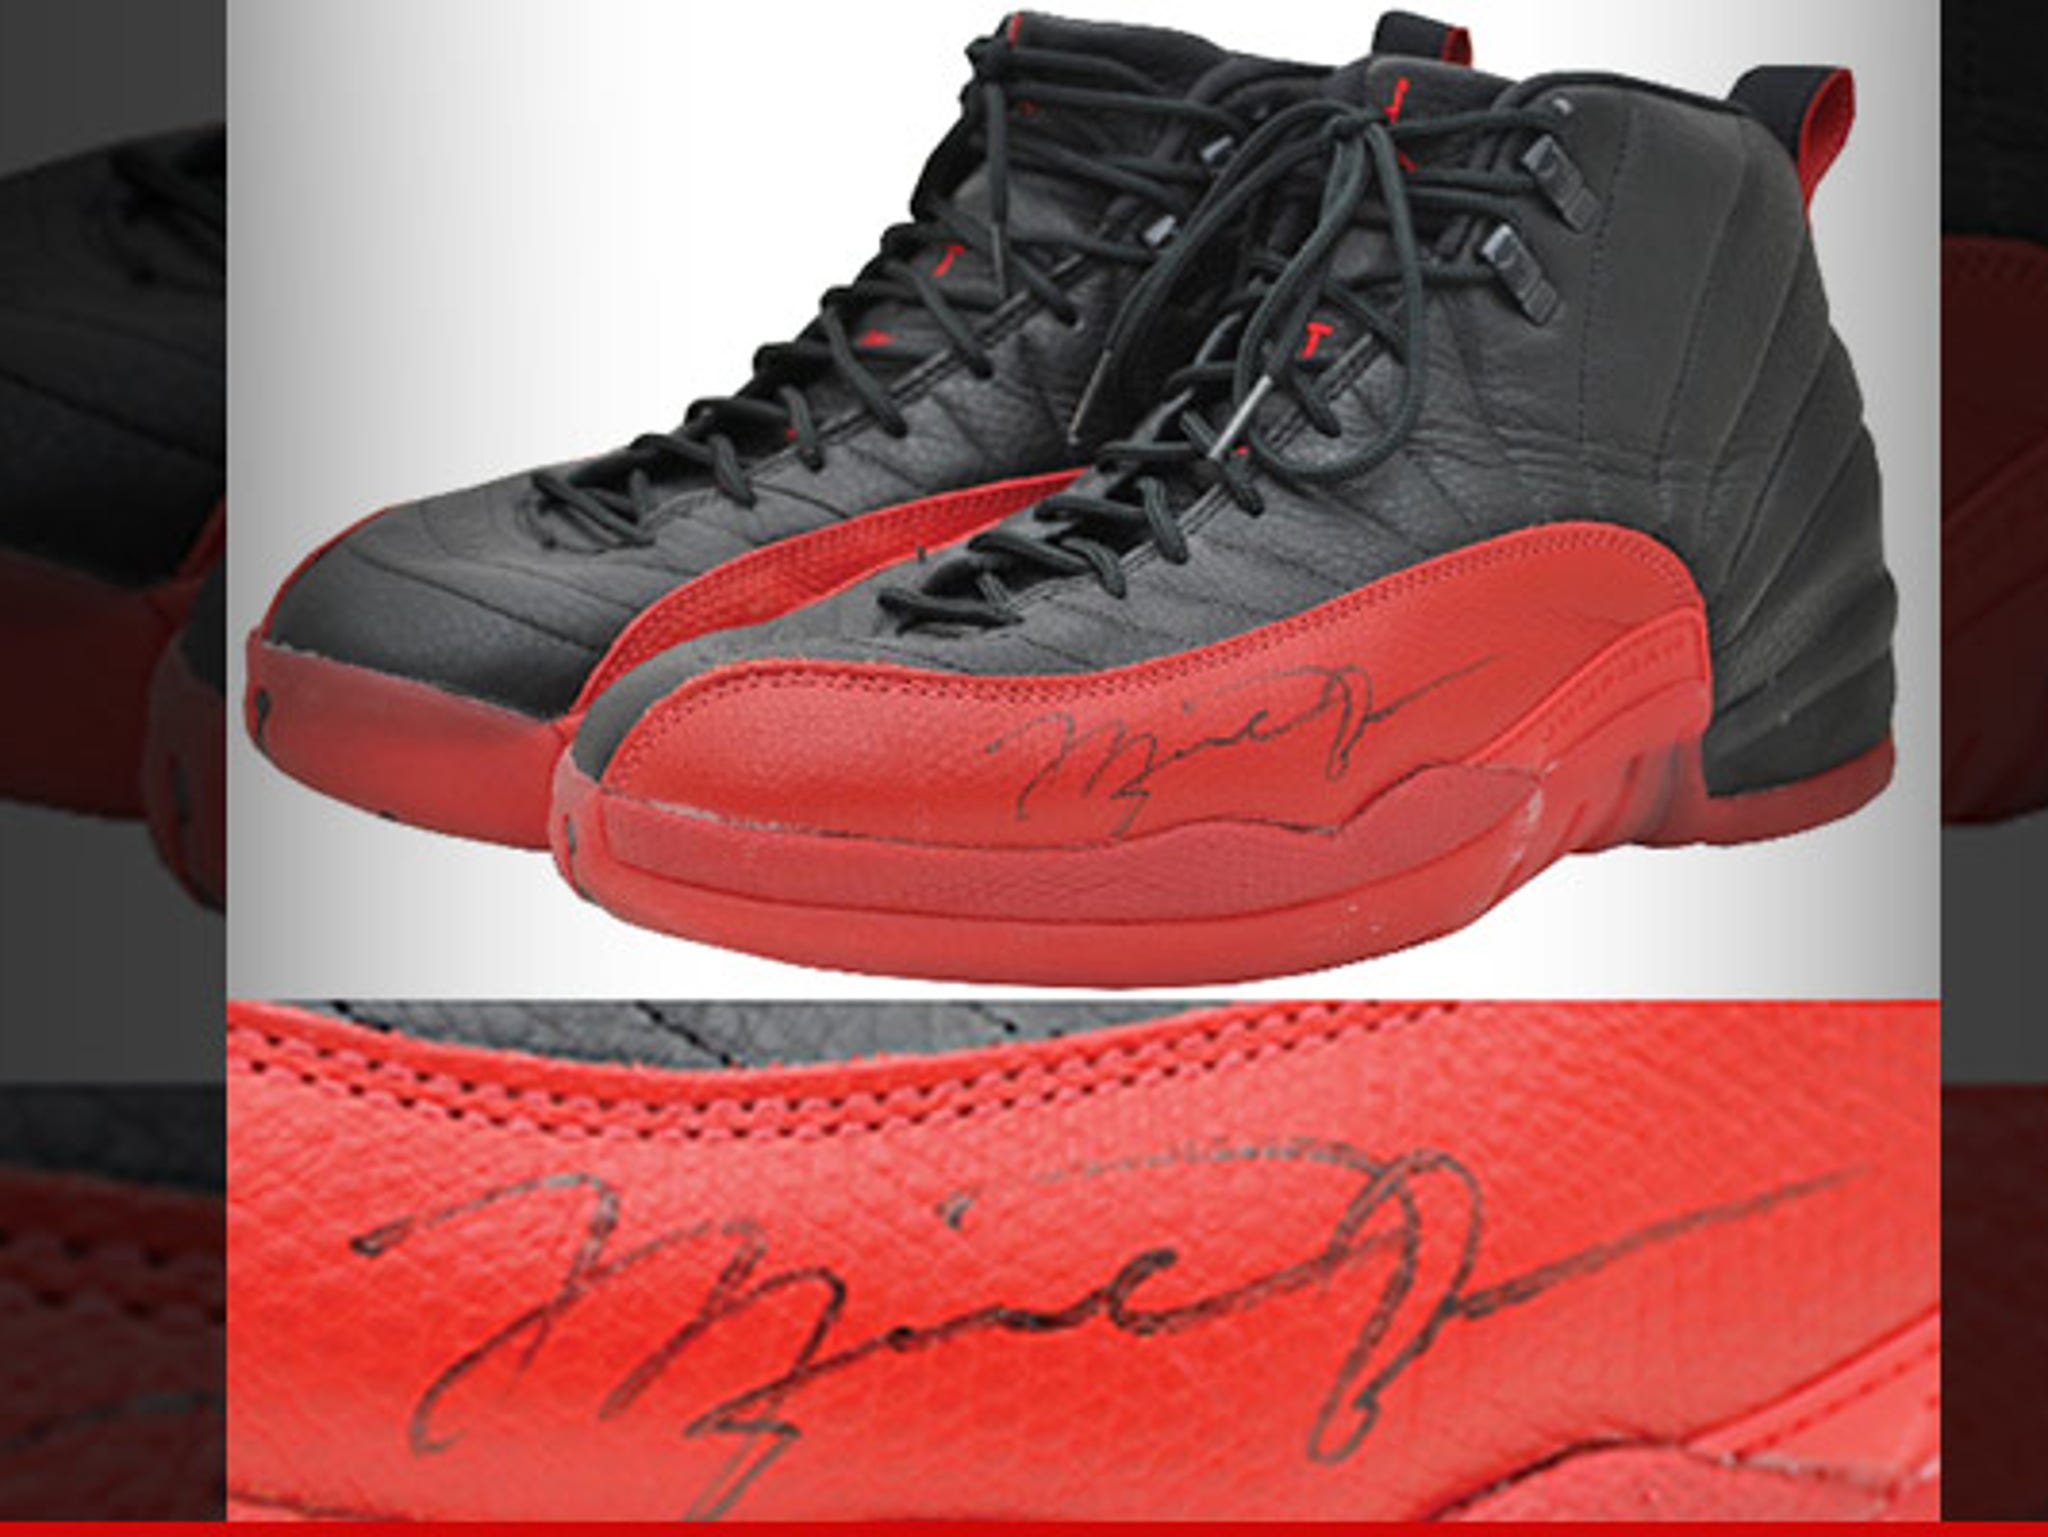 Michael Jordan's 'Flu Game' sneakers auctioned for $104K by former